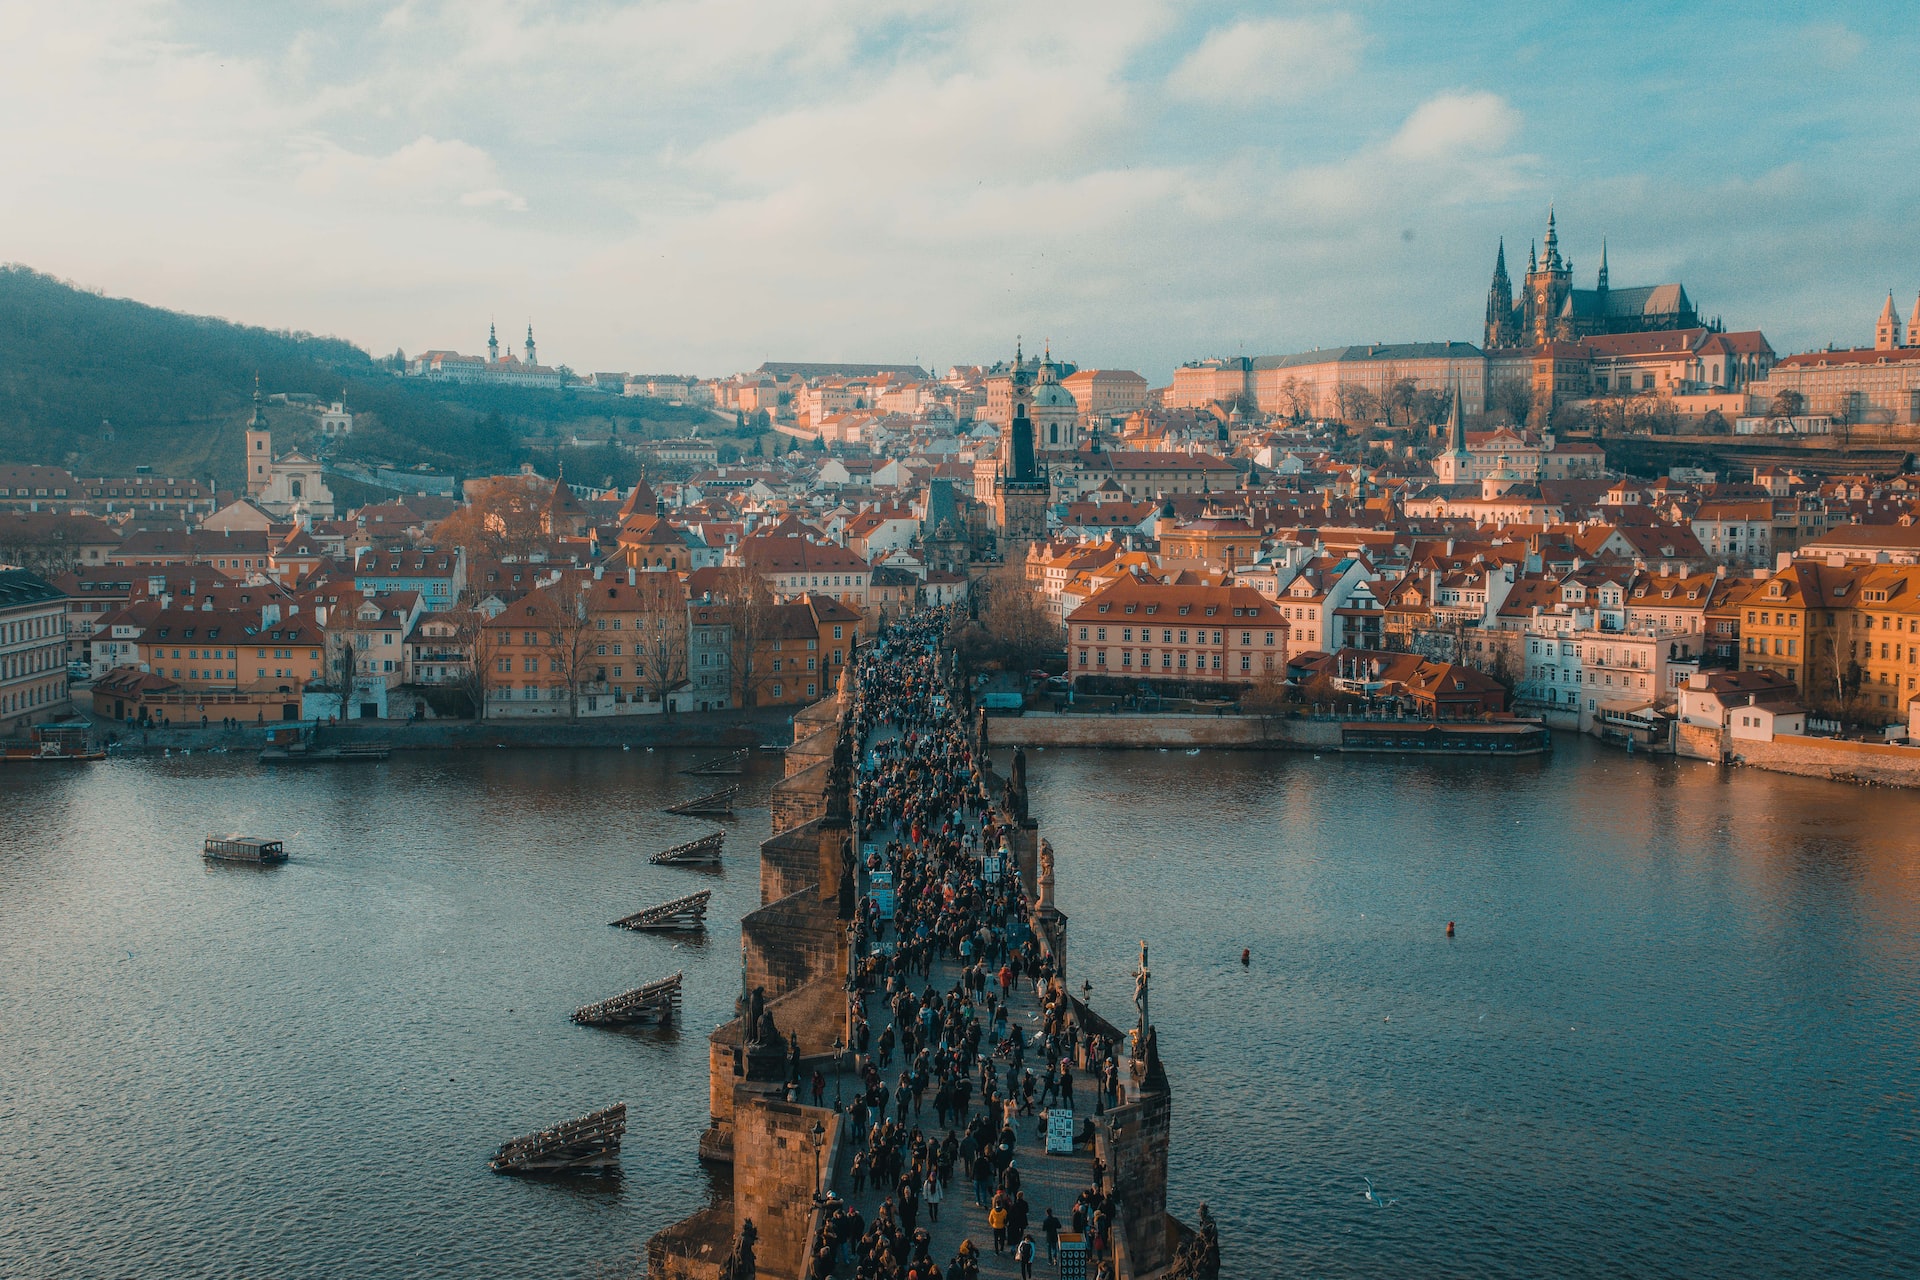 Prague, Czech Republic is one of the best cities to visit in Eastern Europe